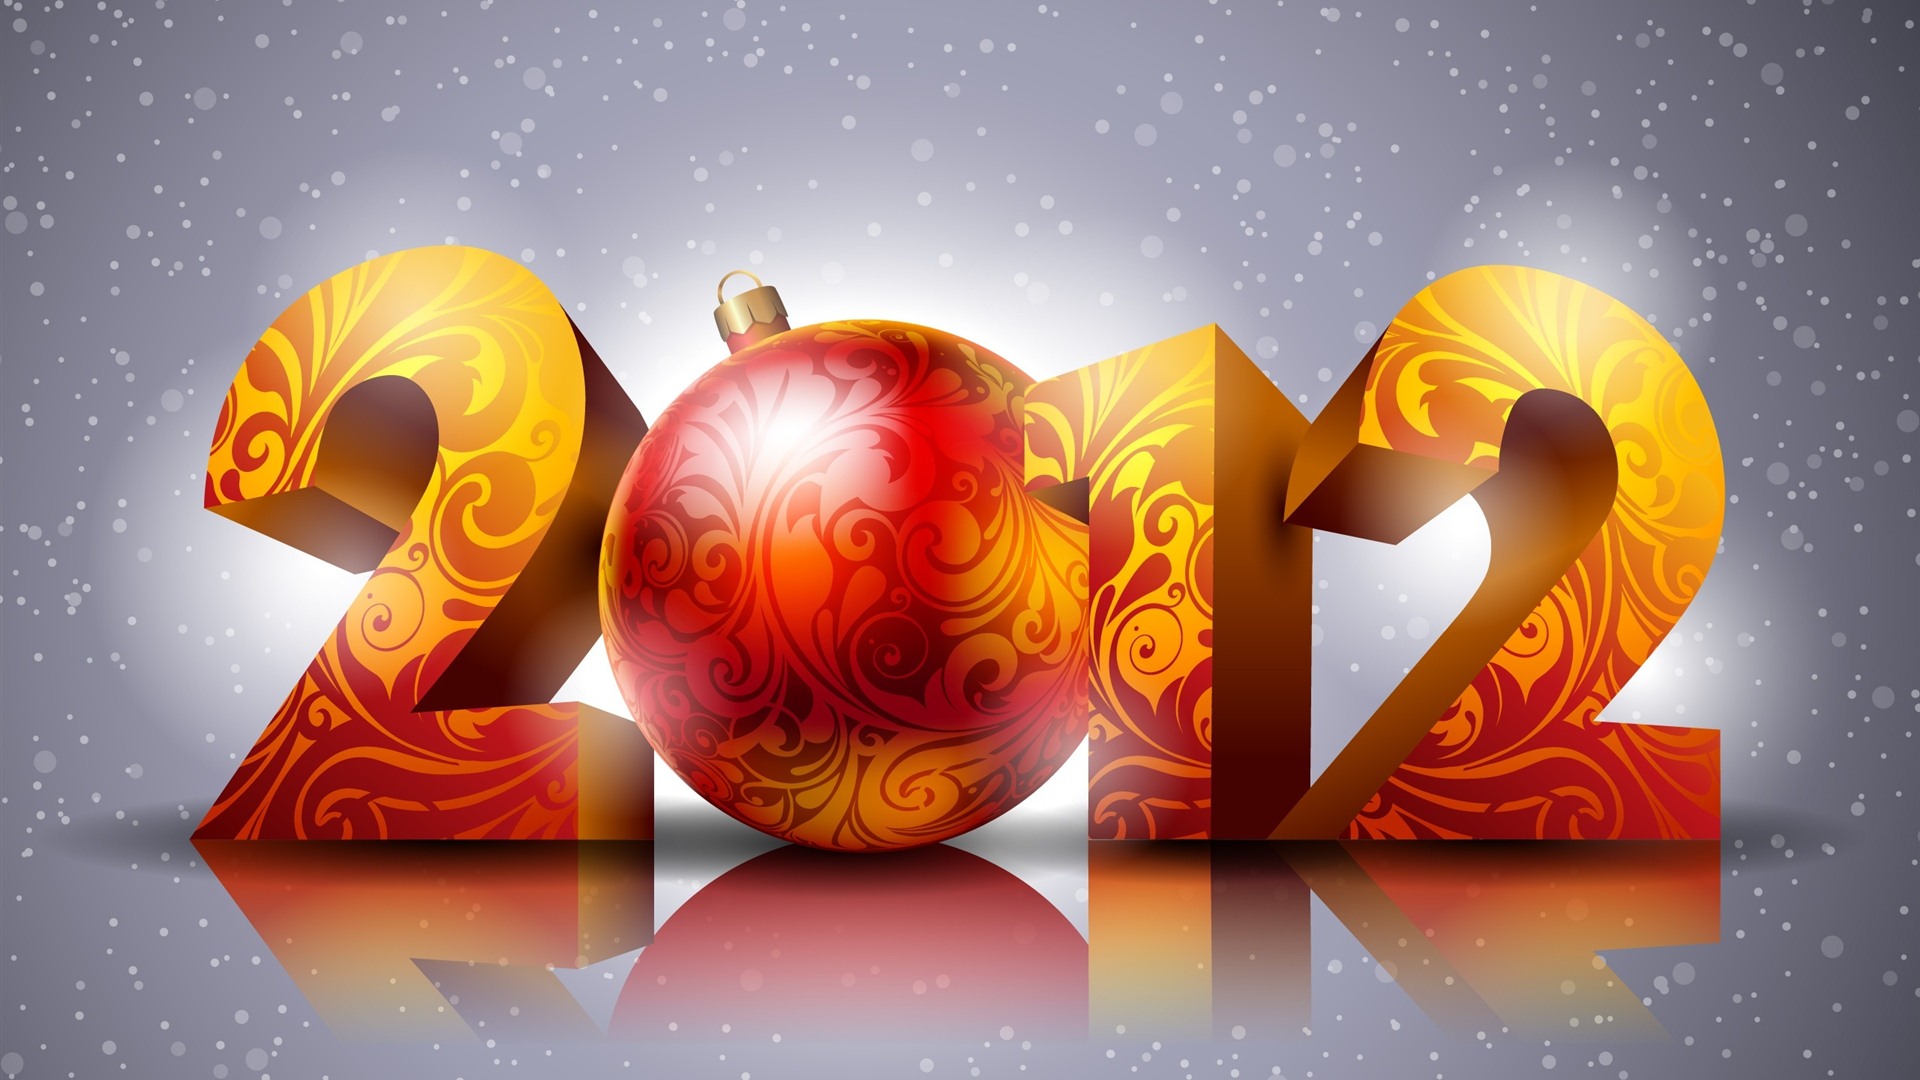 2012 New Year wallpapers (1) #10 - 1920x1080